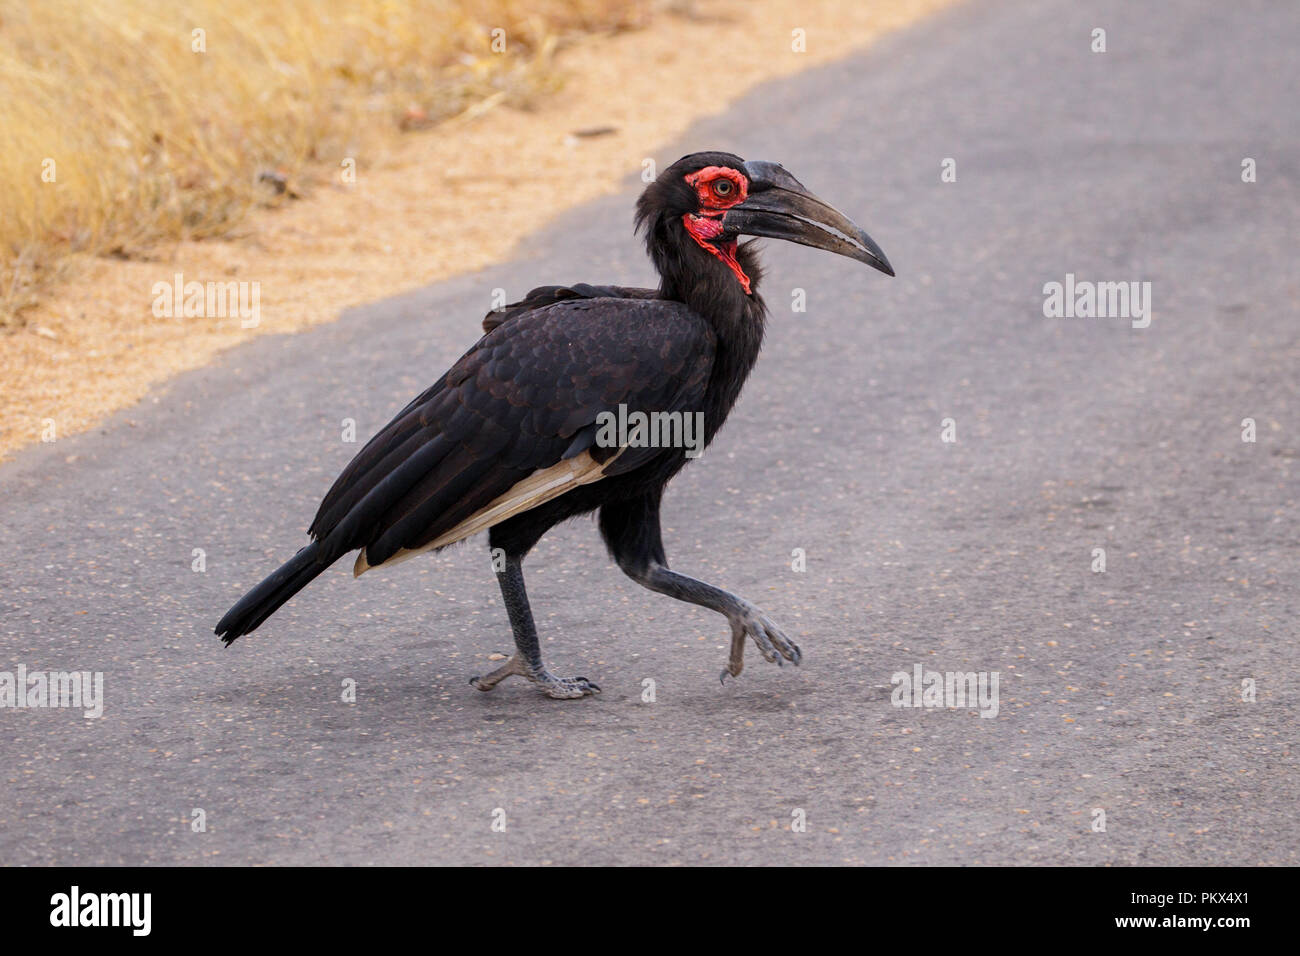 Southern Ground-Hornbill  Bucorvus leadbeateri south of Mopane Camp, Kruger National Park, Northern Province, South Africa 18 August 2018       Adult  Stock Photo